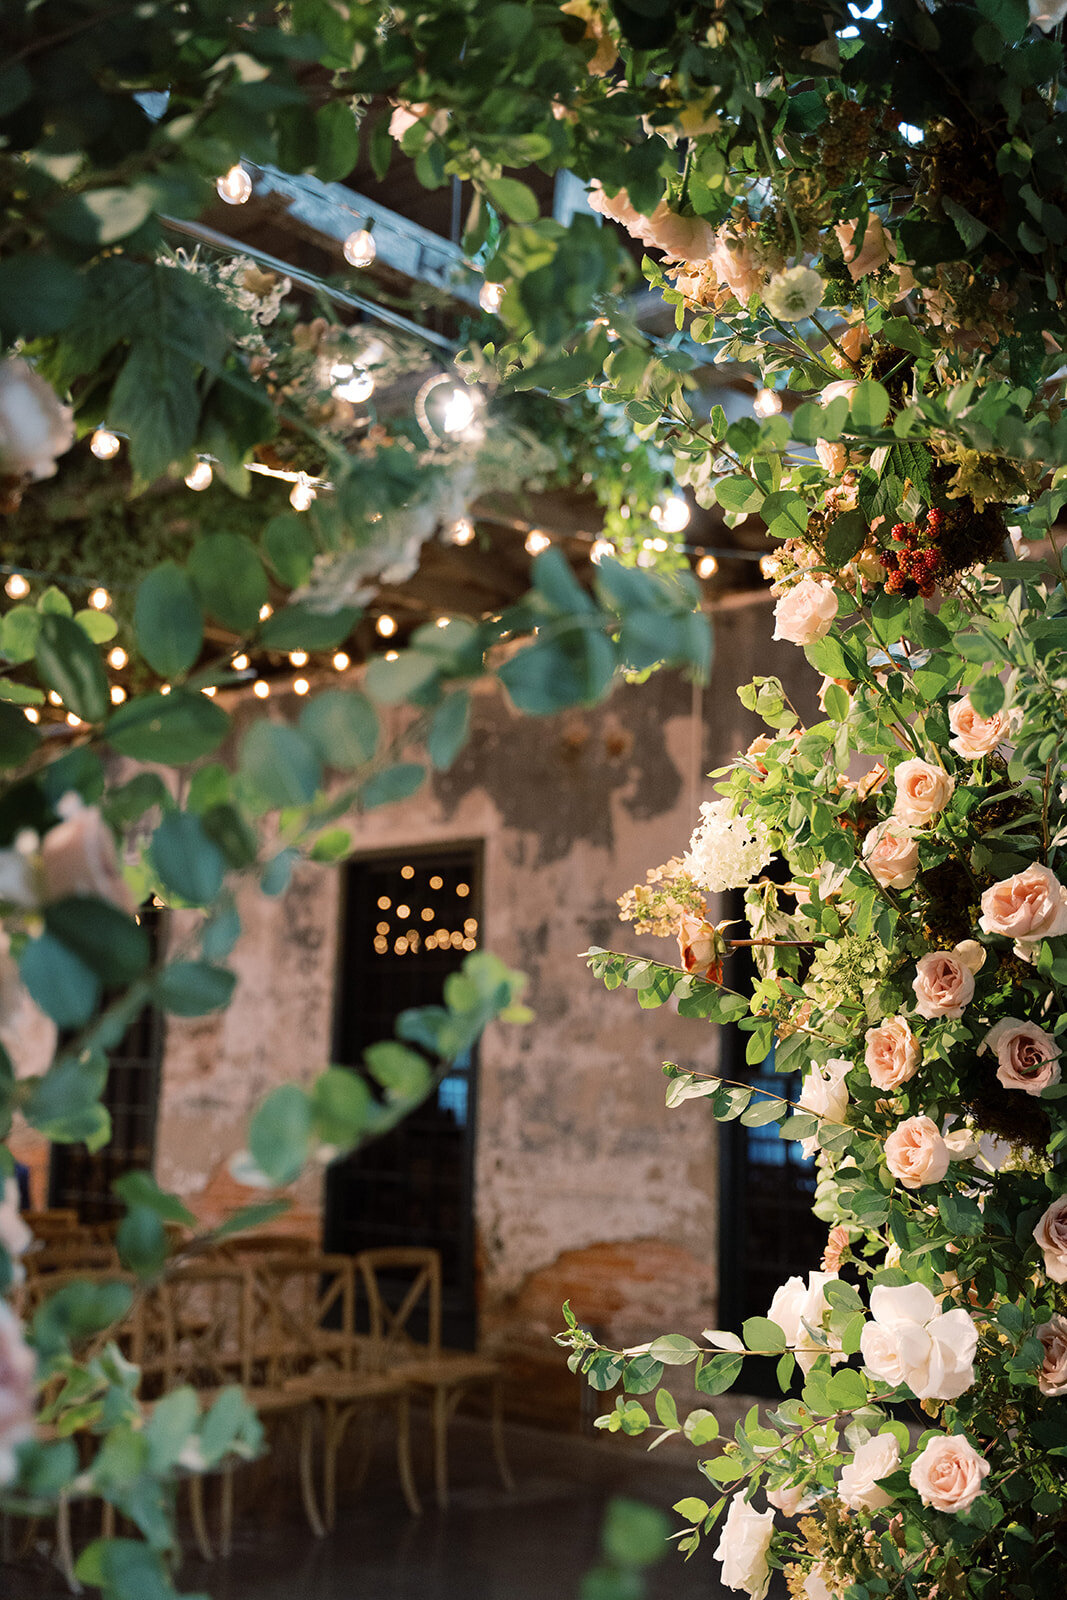 Full floral arch including white, blush, and peach garden roses and greenery hanging from the ceiling.